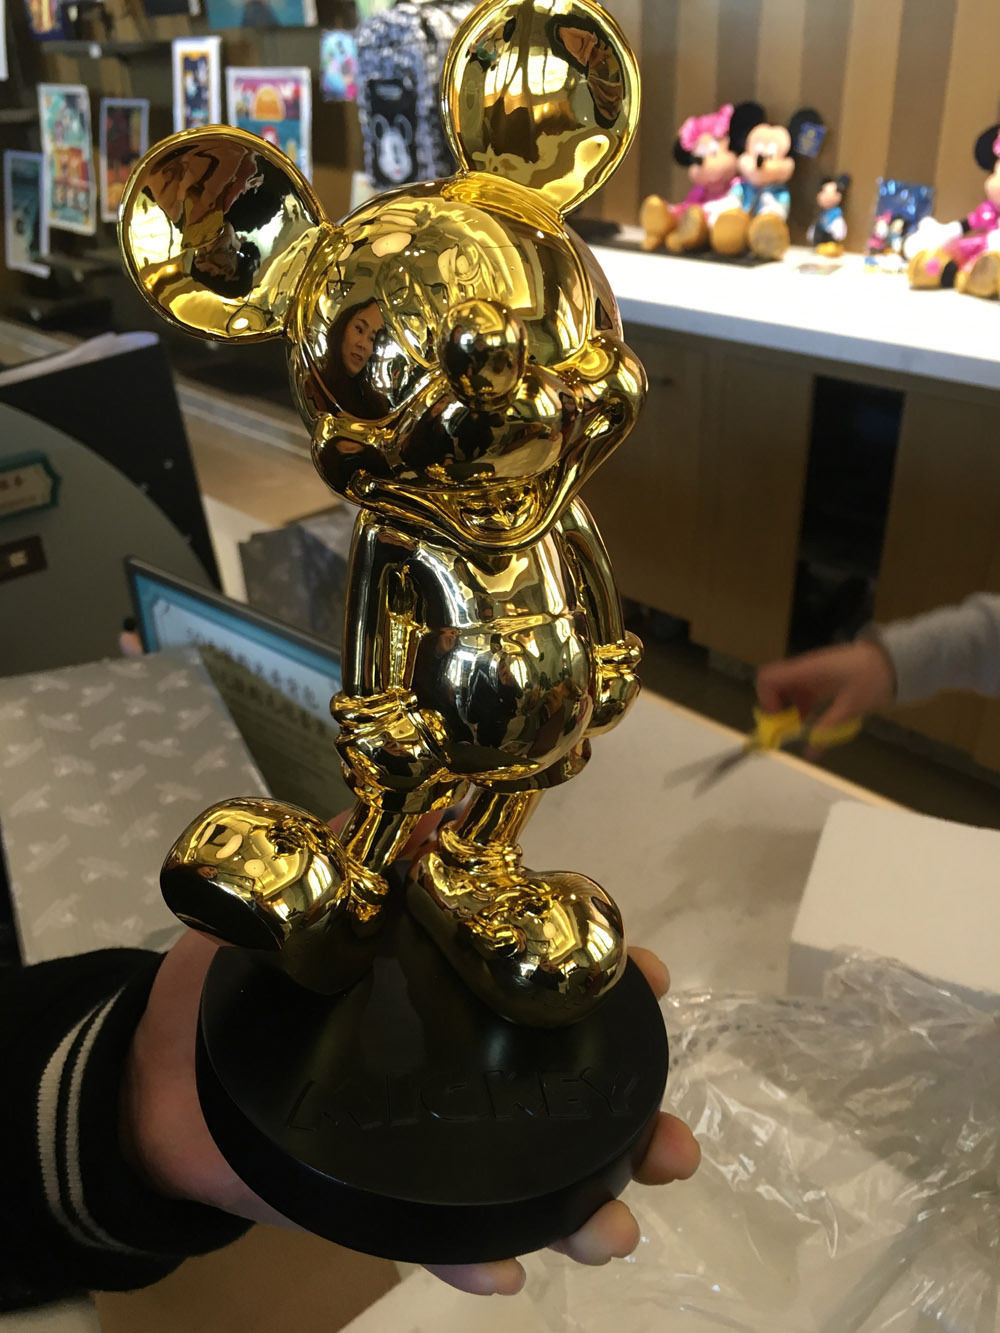 Extremely Rare! Walt Disney Mickey Mouse Gold Art Figurine Statue in Box